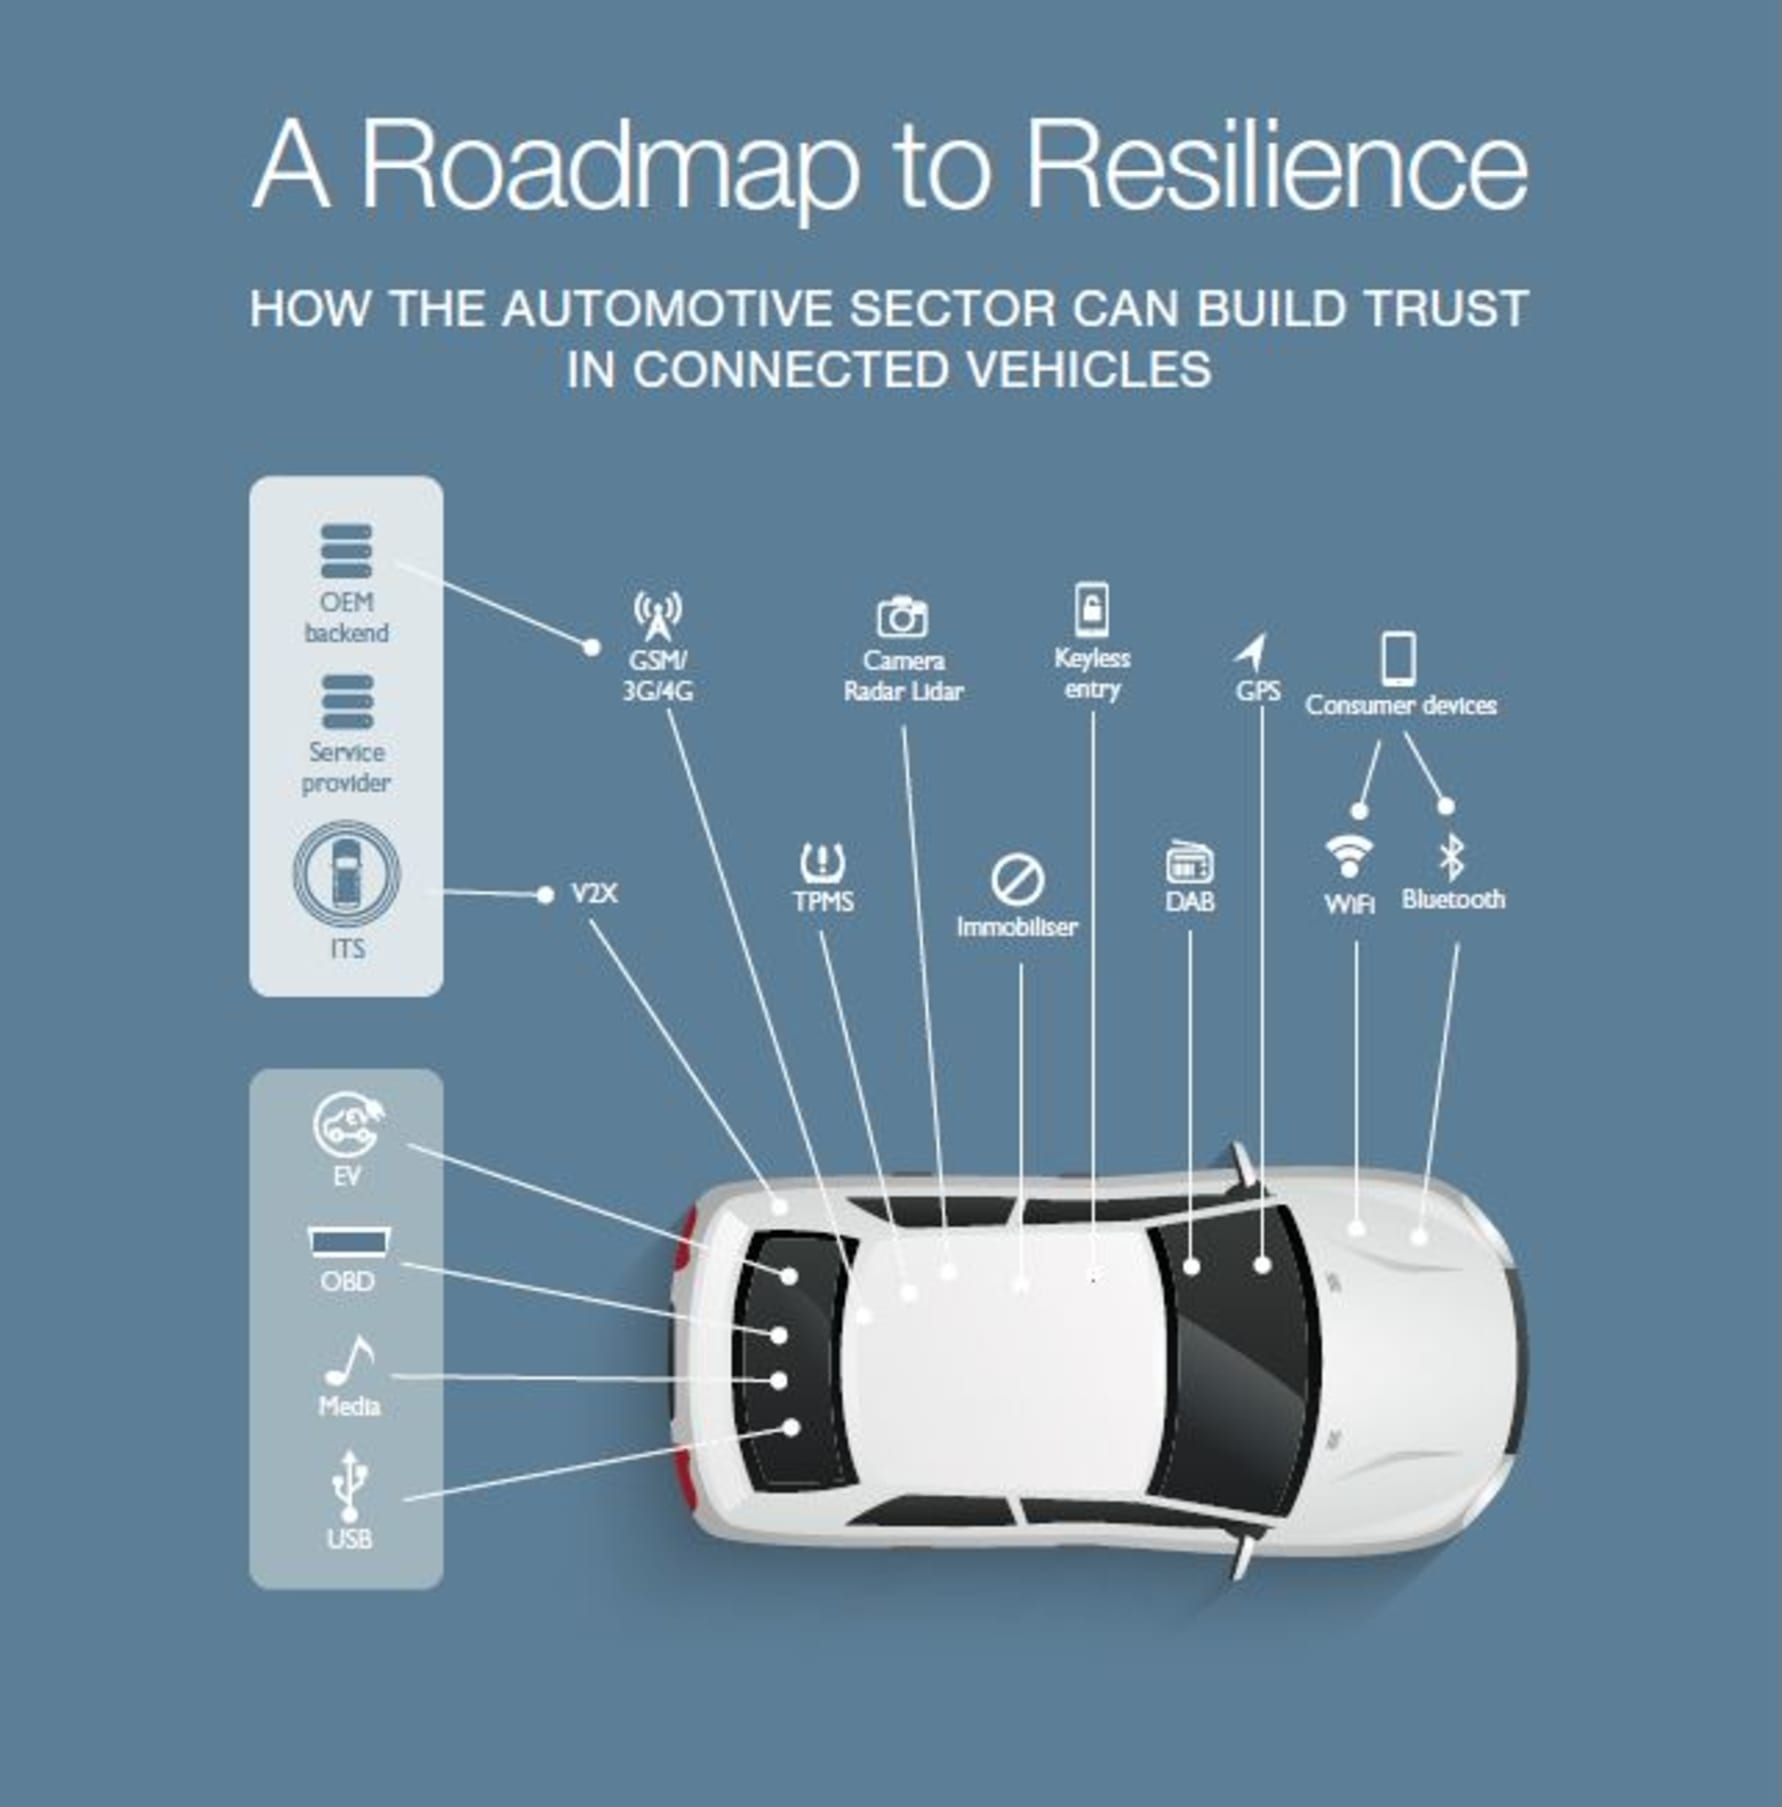 A Roadmap to Resilience